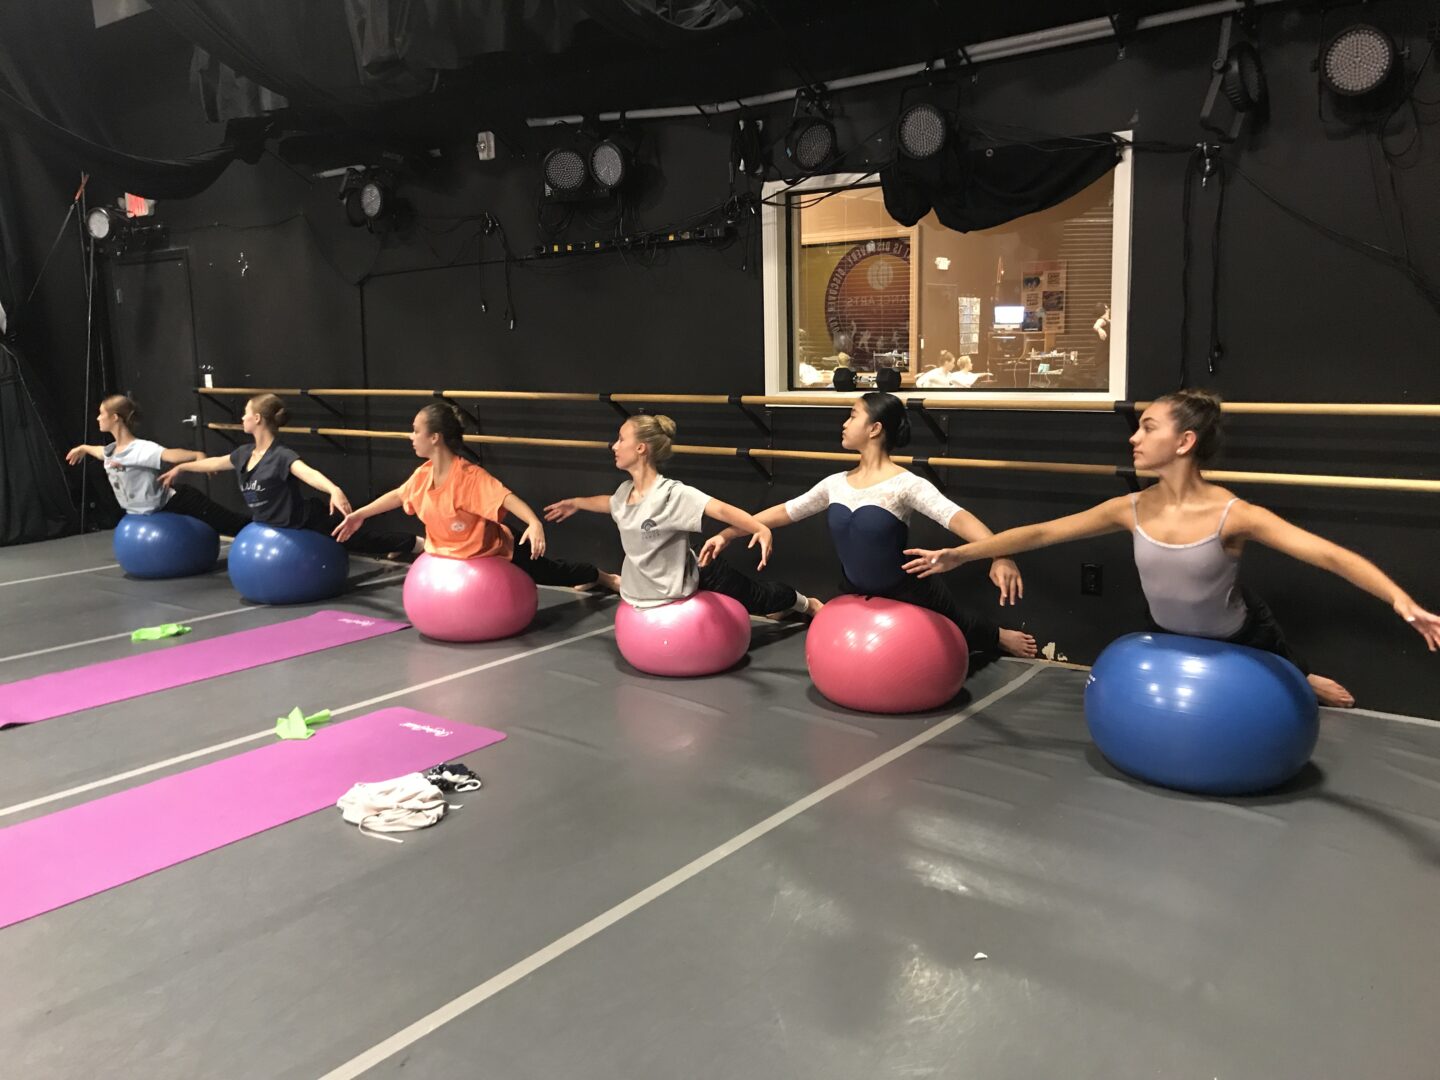 A group of dancers in a studio doing yoga on exercise balls.